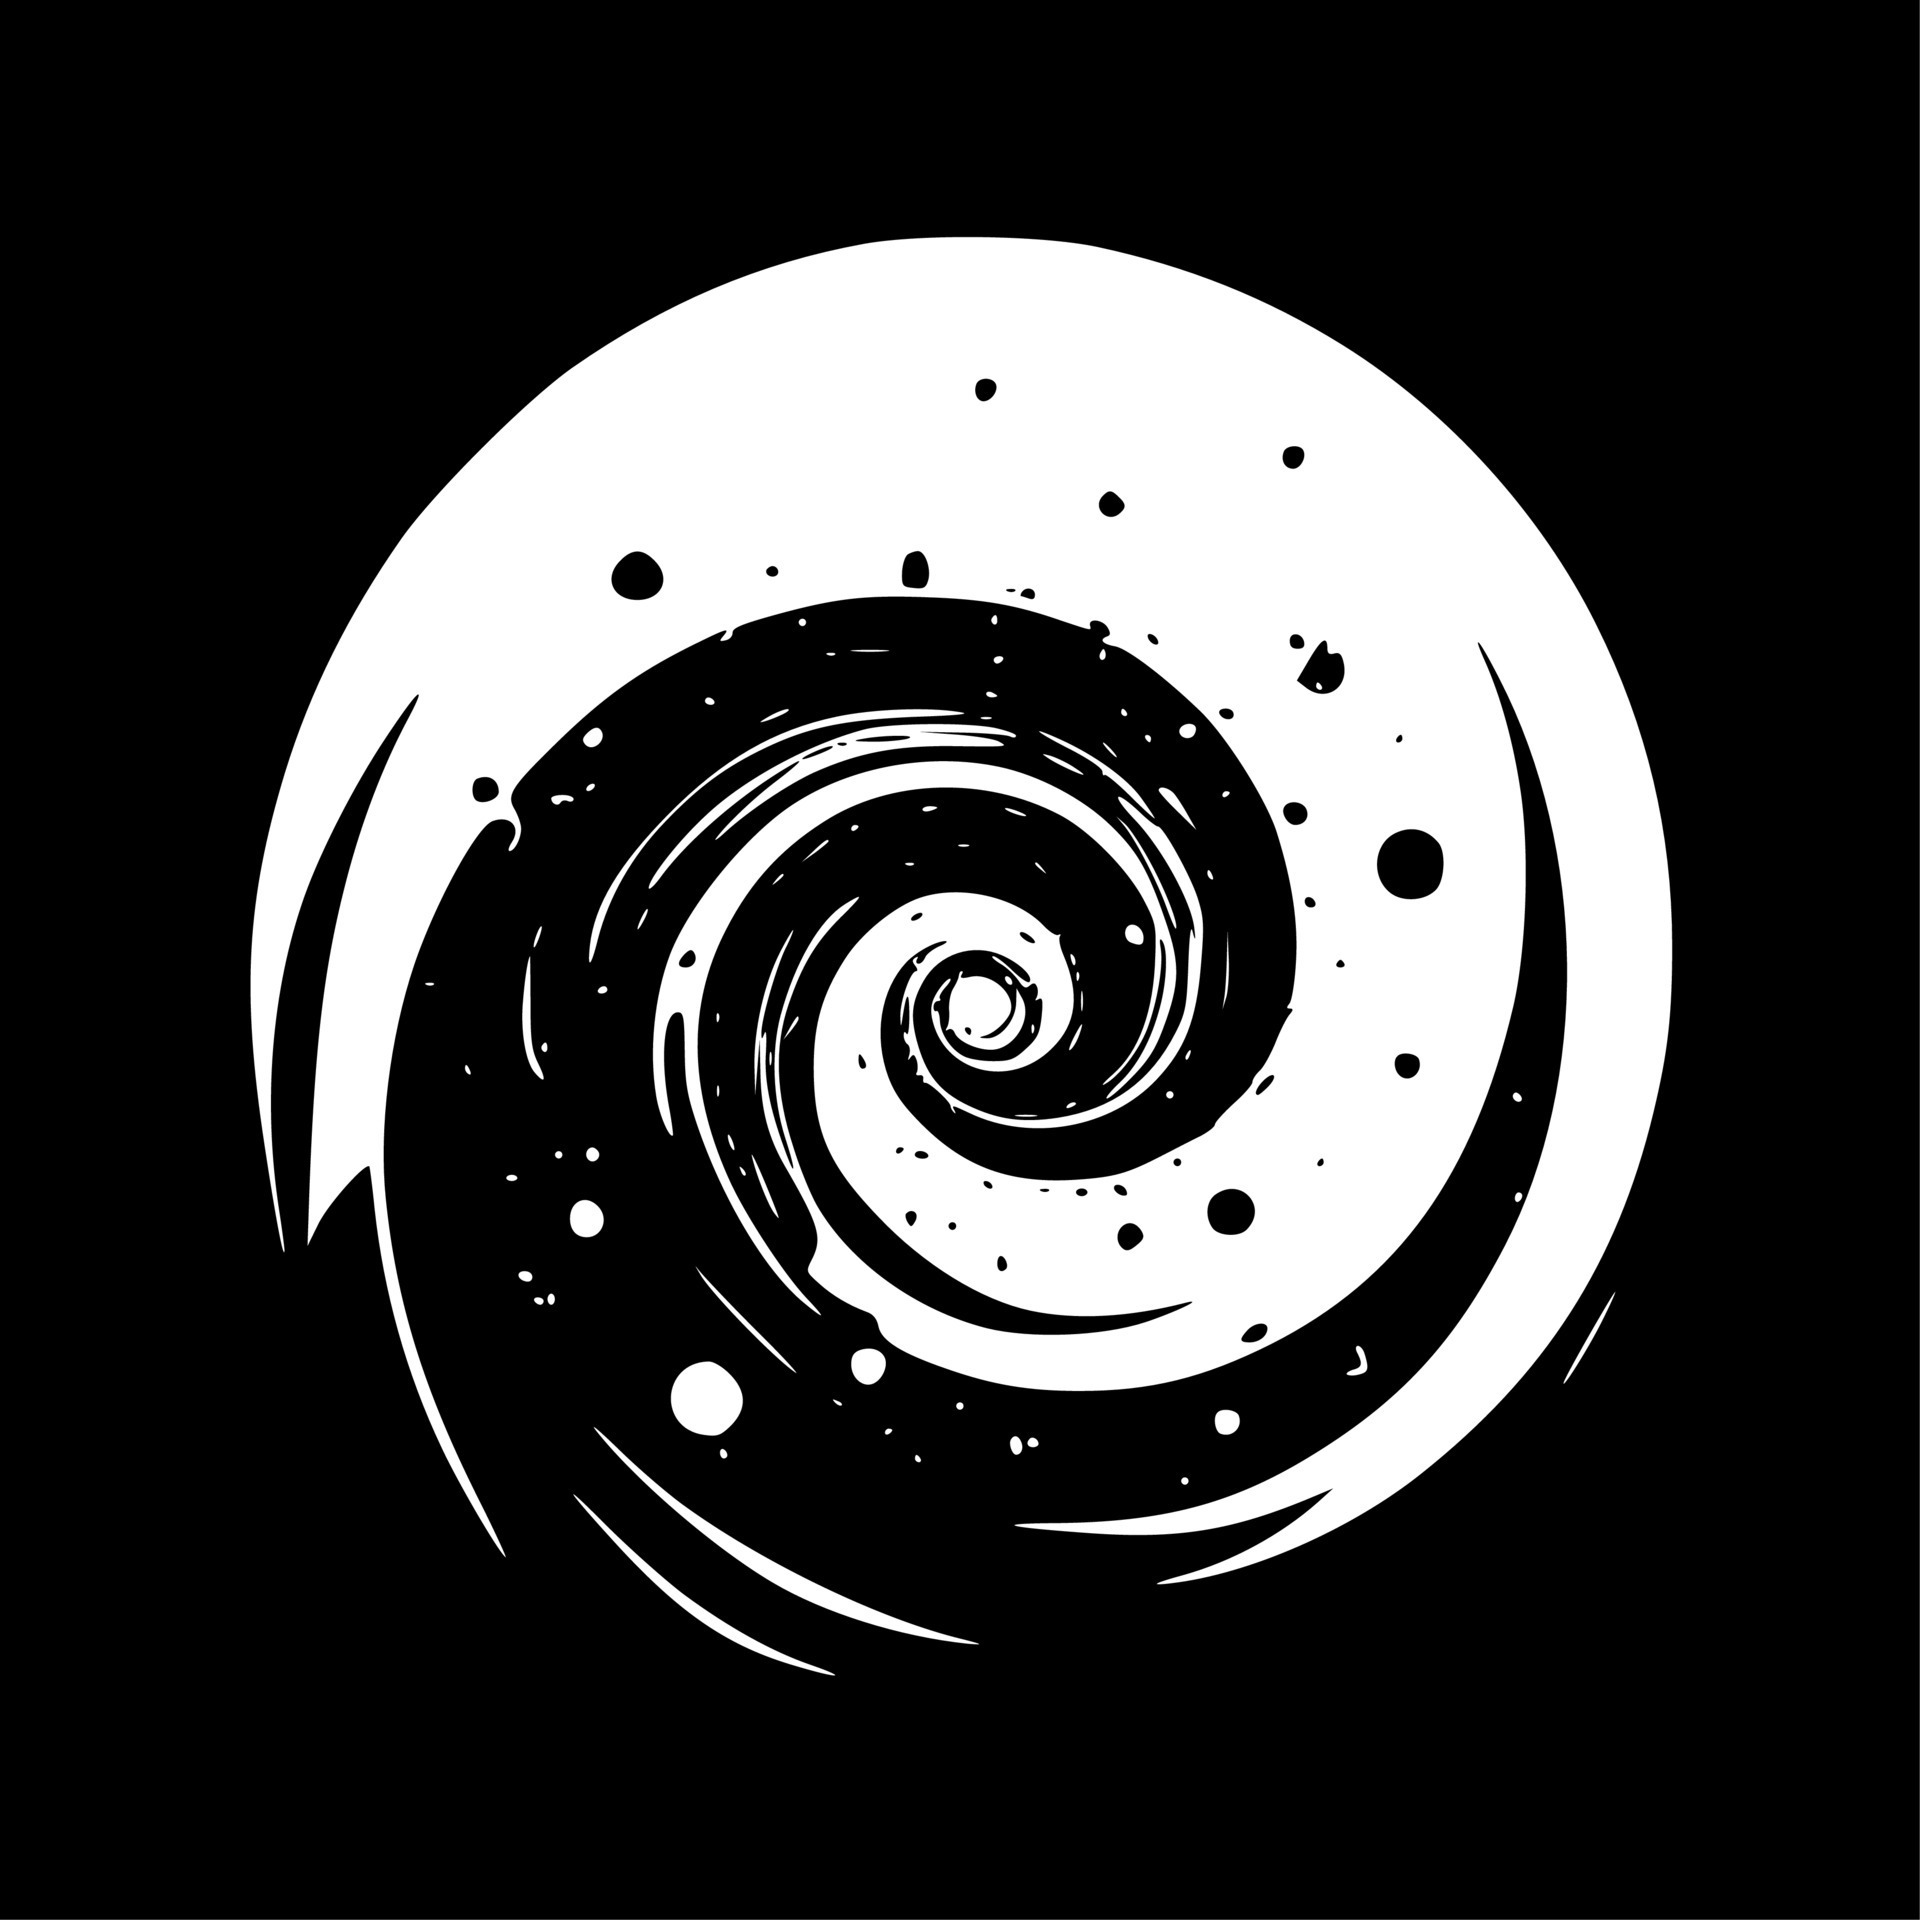 Galaxy - Black and White Isolated Icon - Vector illustration 23539825 ...